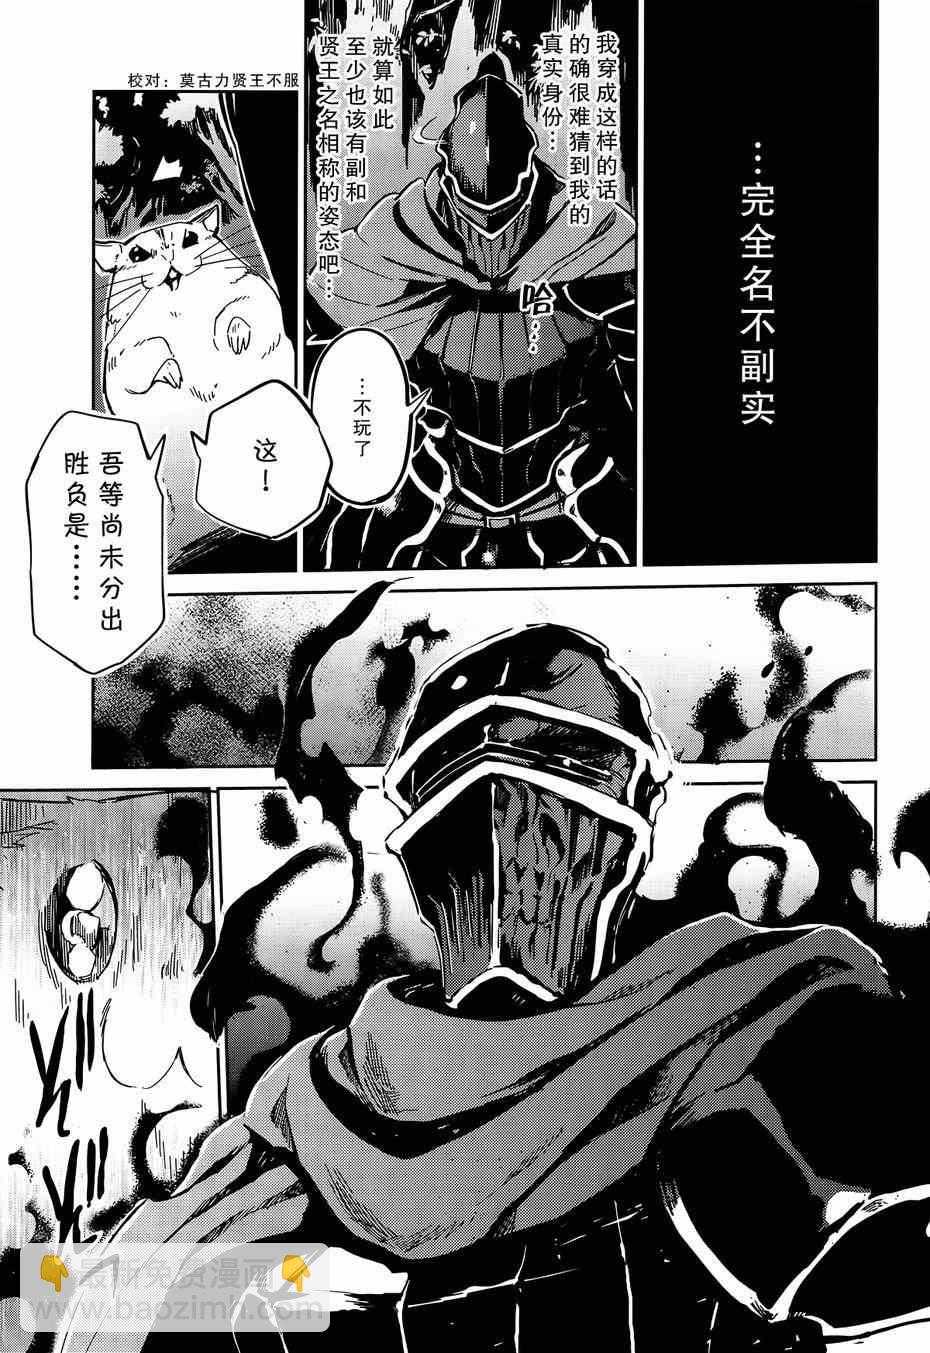 OVERLORD - 第7話 - 7